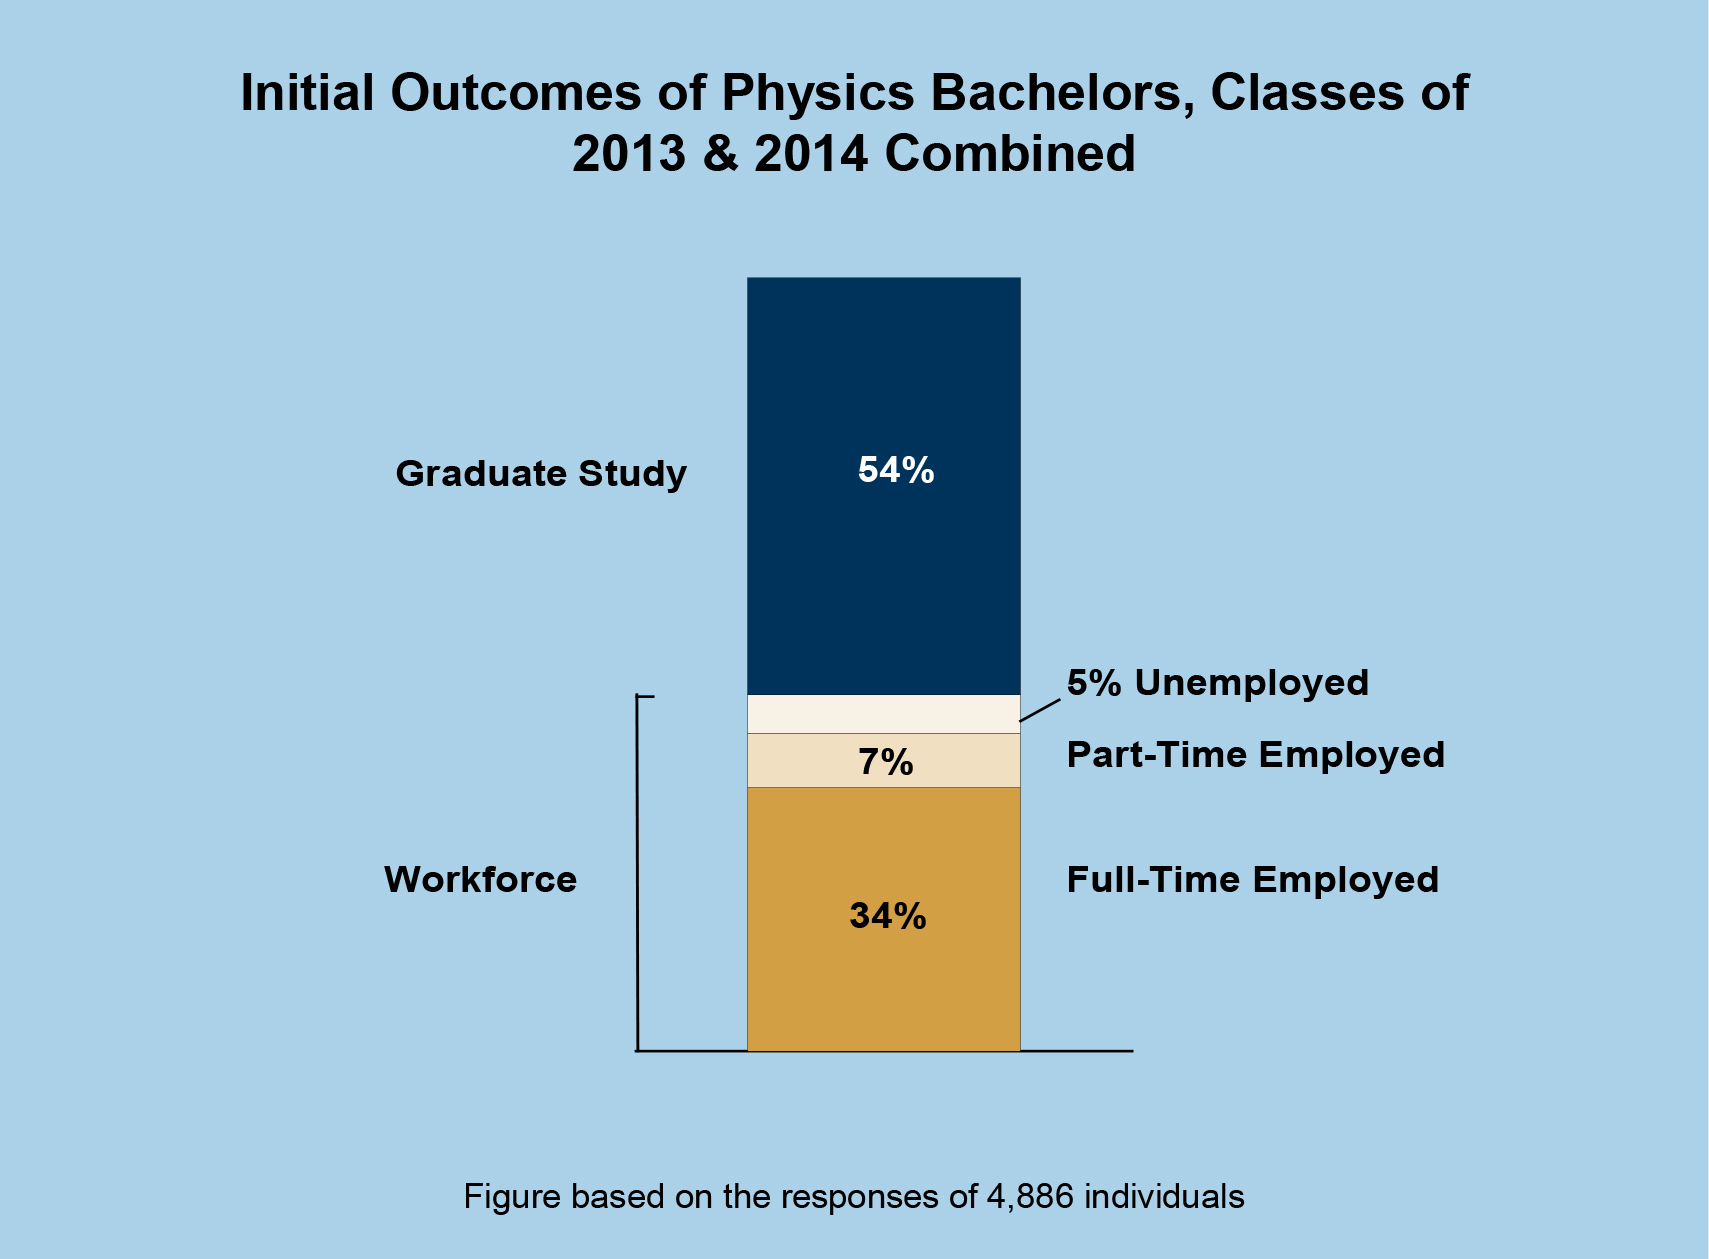 Initial Outcomes of Physics Bachelors Employment